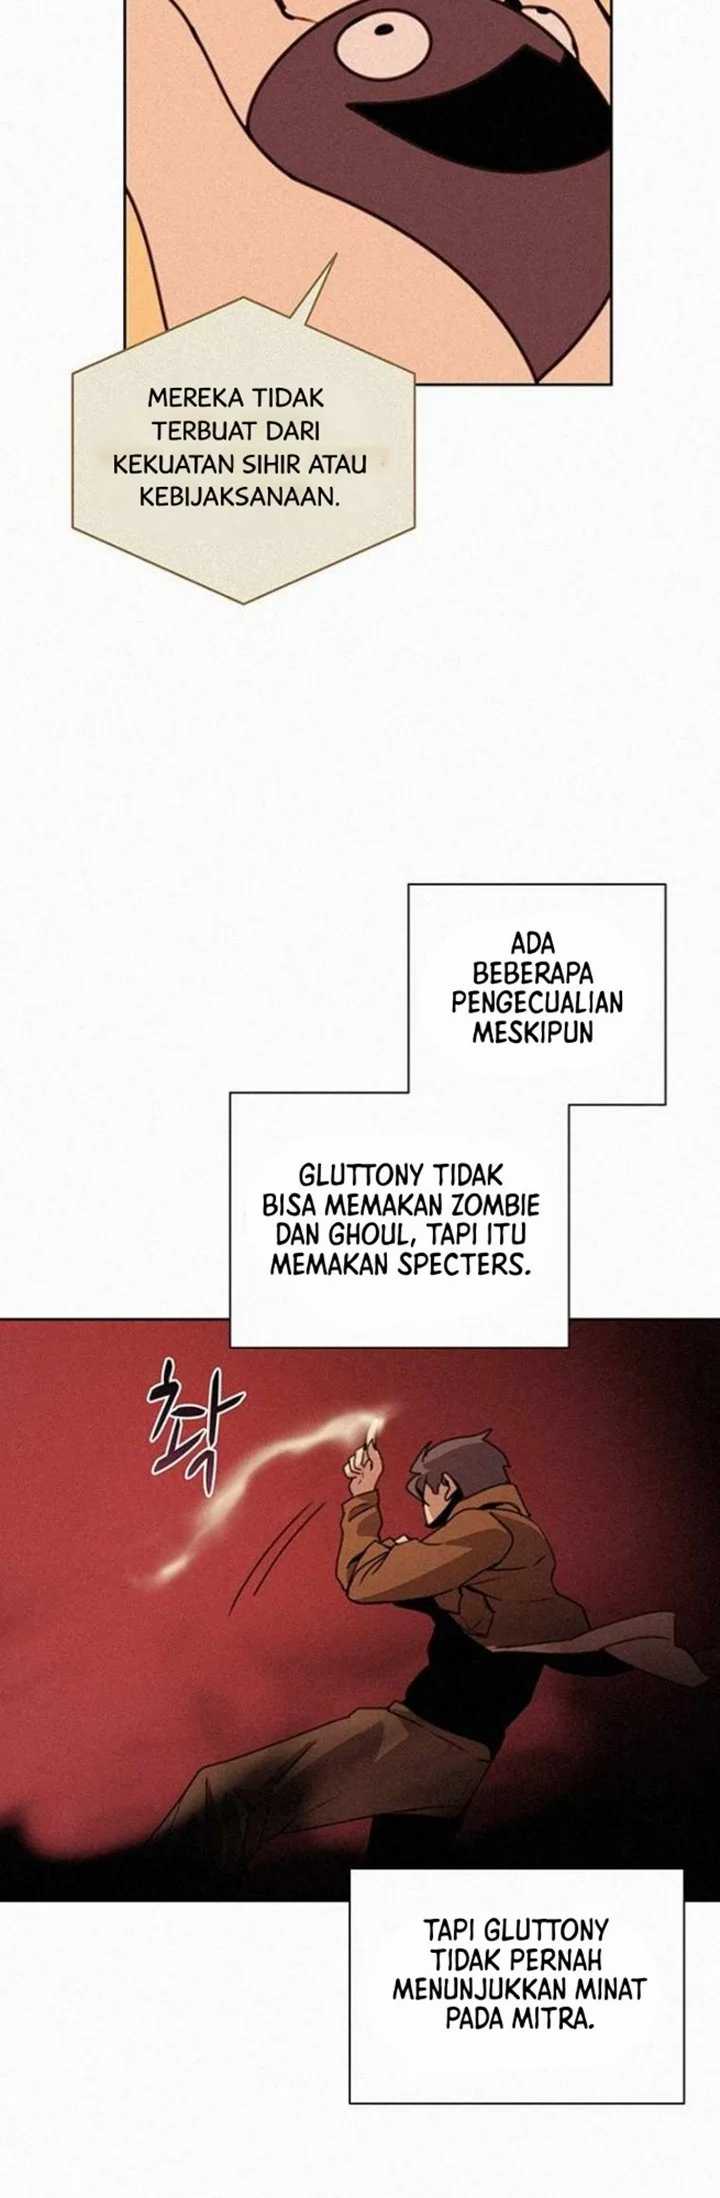 The Book Eating Magician Chapter 41